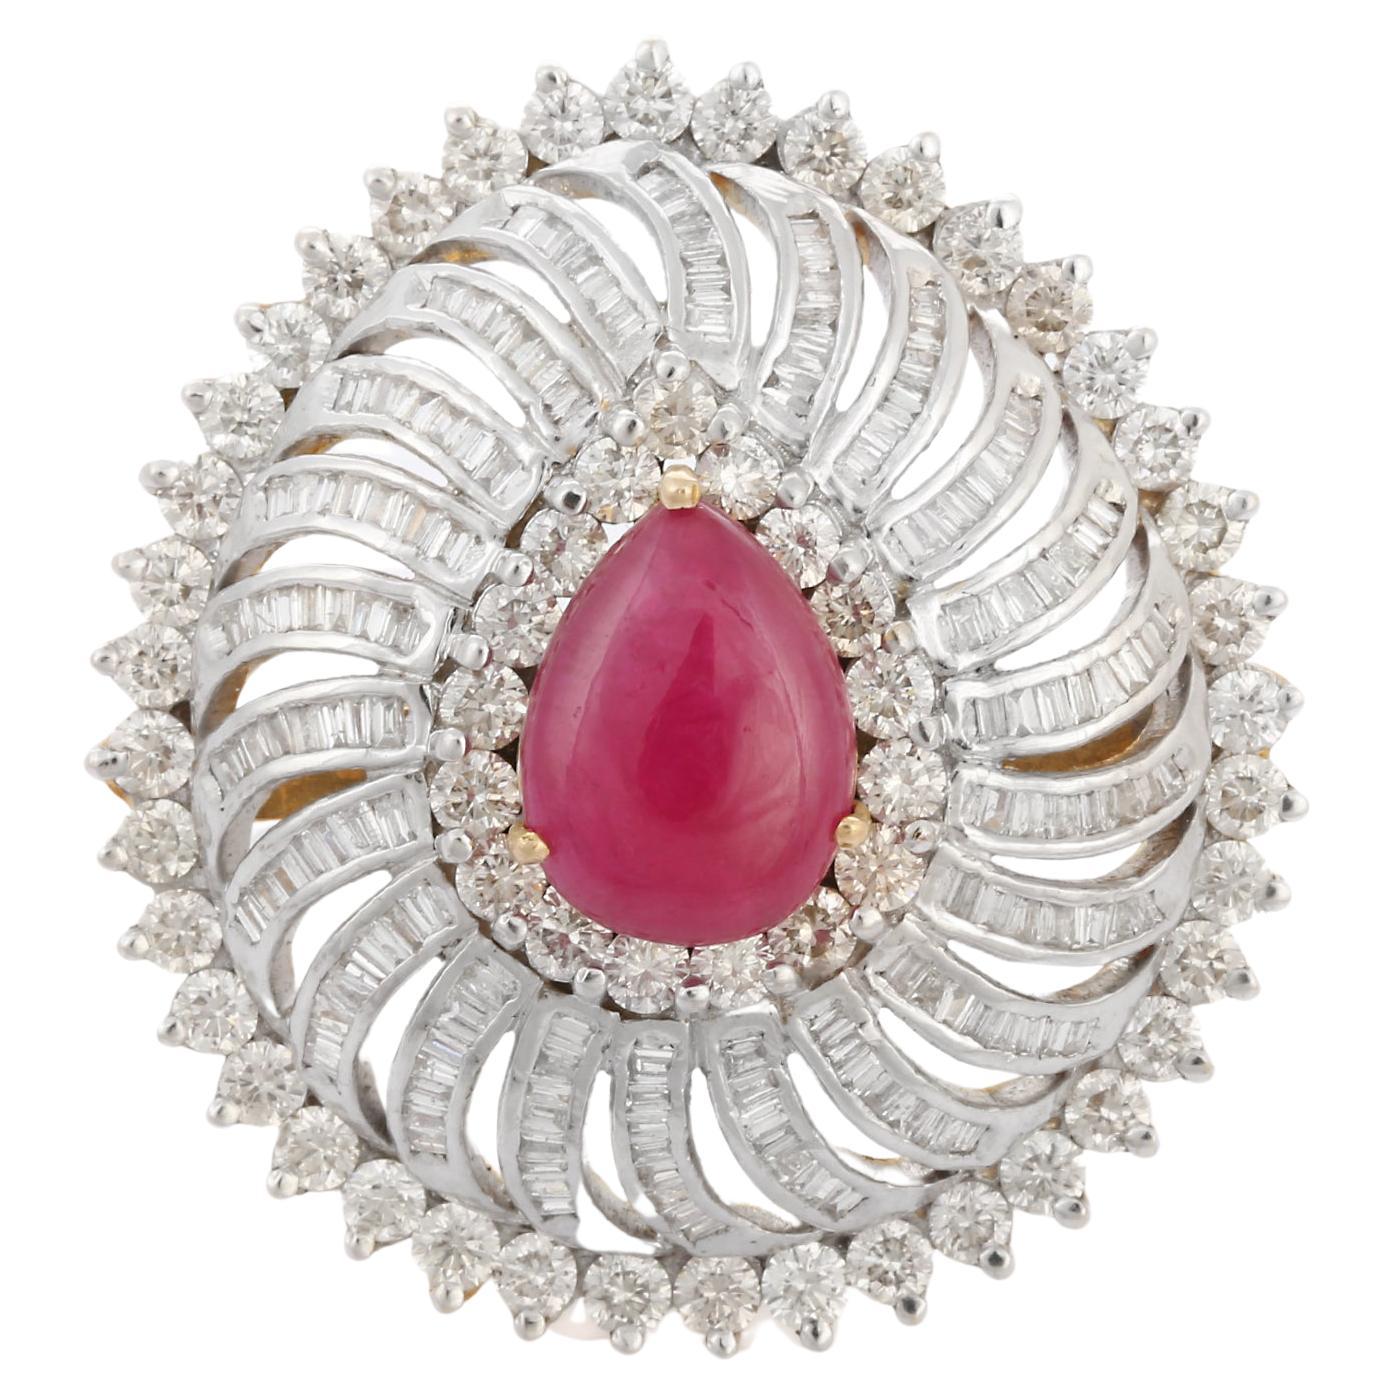 For Sale:  Statement Ruby Cocktail Ring with Halo of Diamonds in 14K White Gold